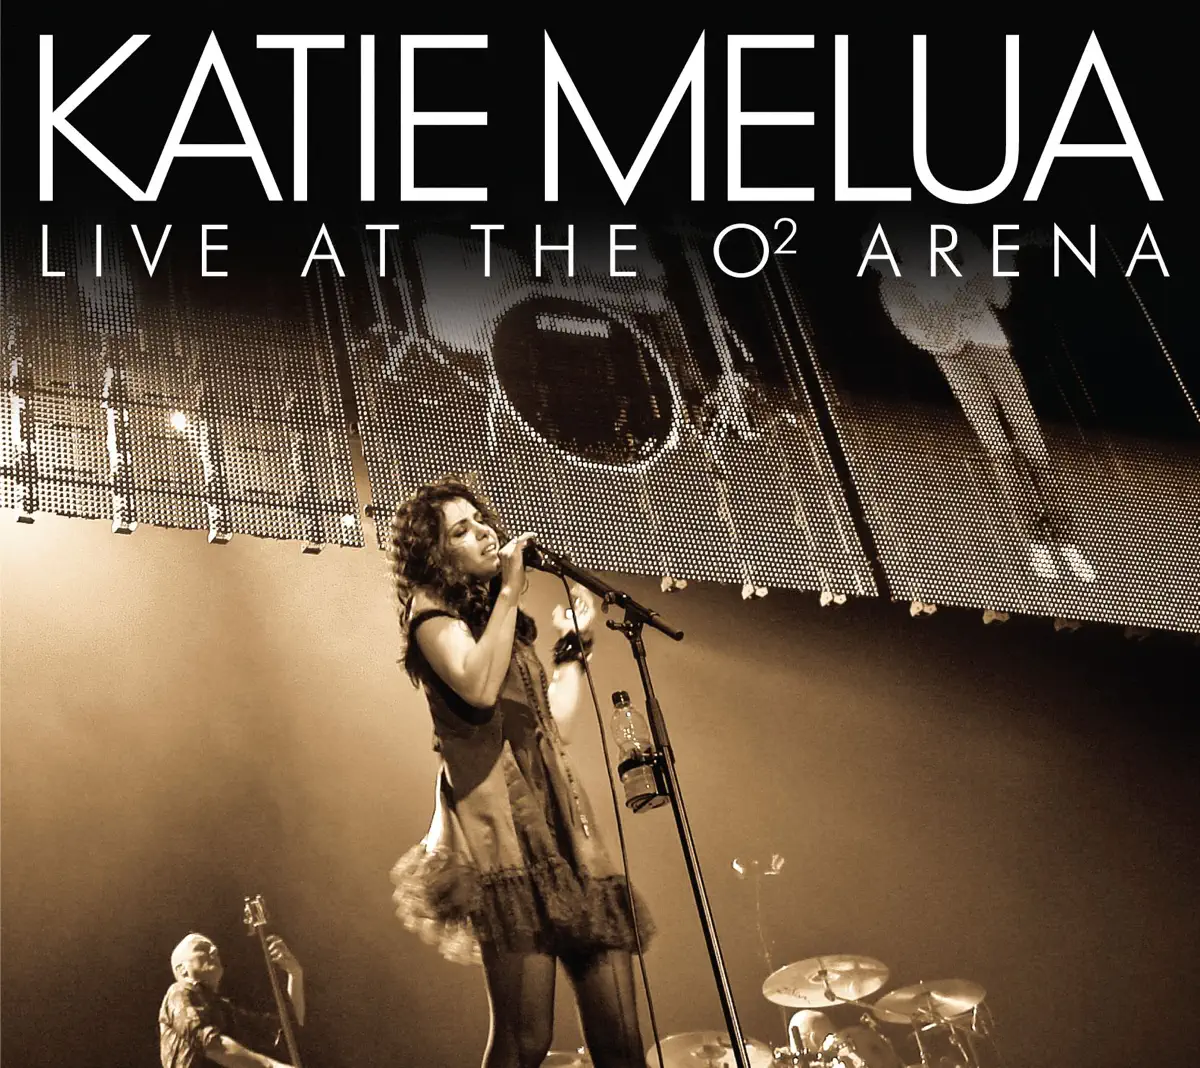 Katie Melua - Live At the O2 Arena (Deluxe Edition) (2009) [iTunes Plus AAC M4A]-新房子